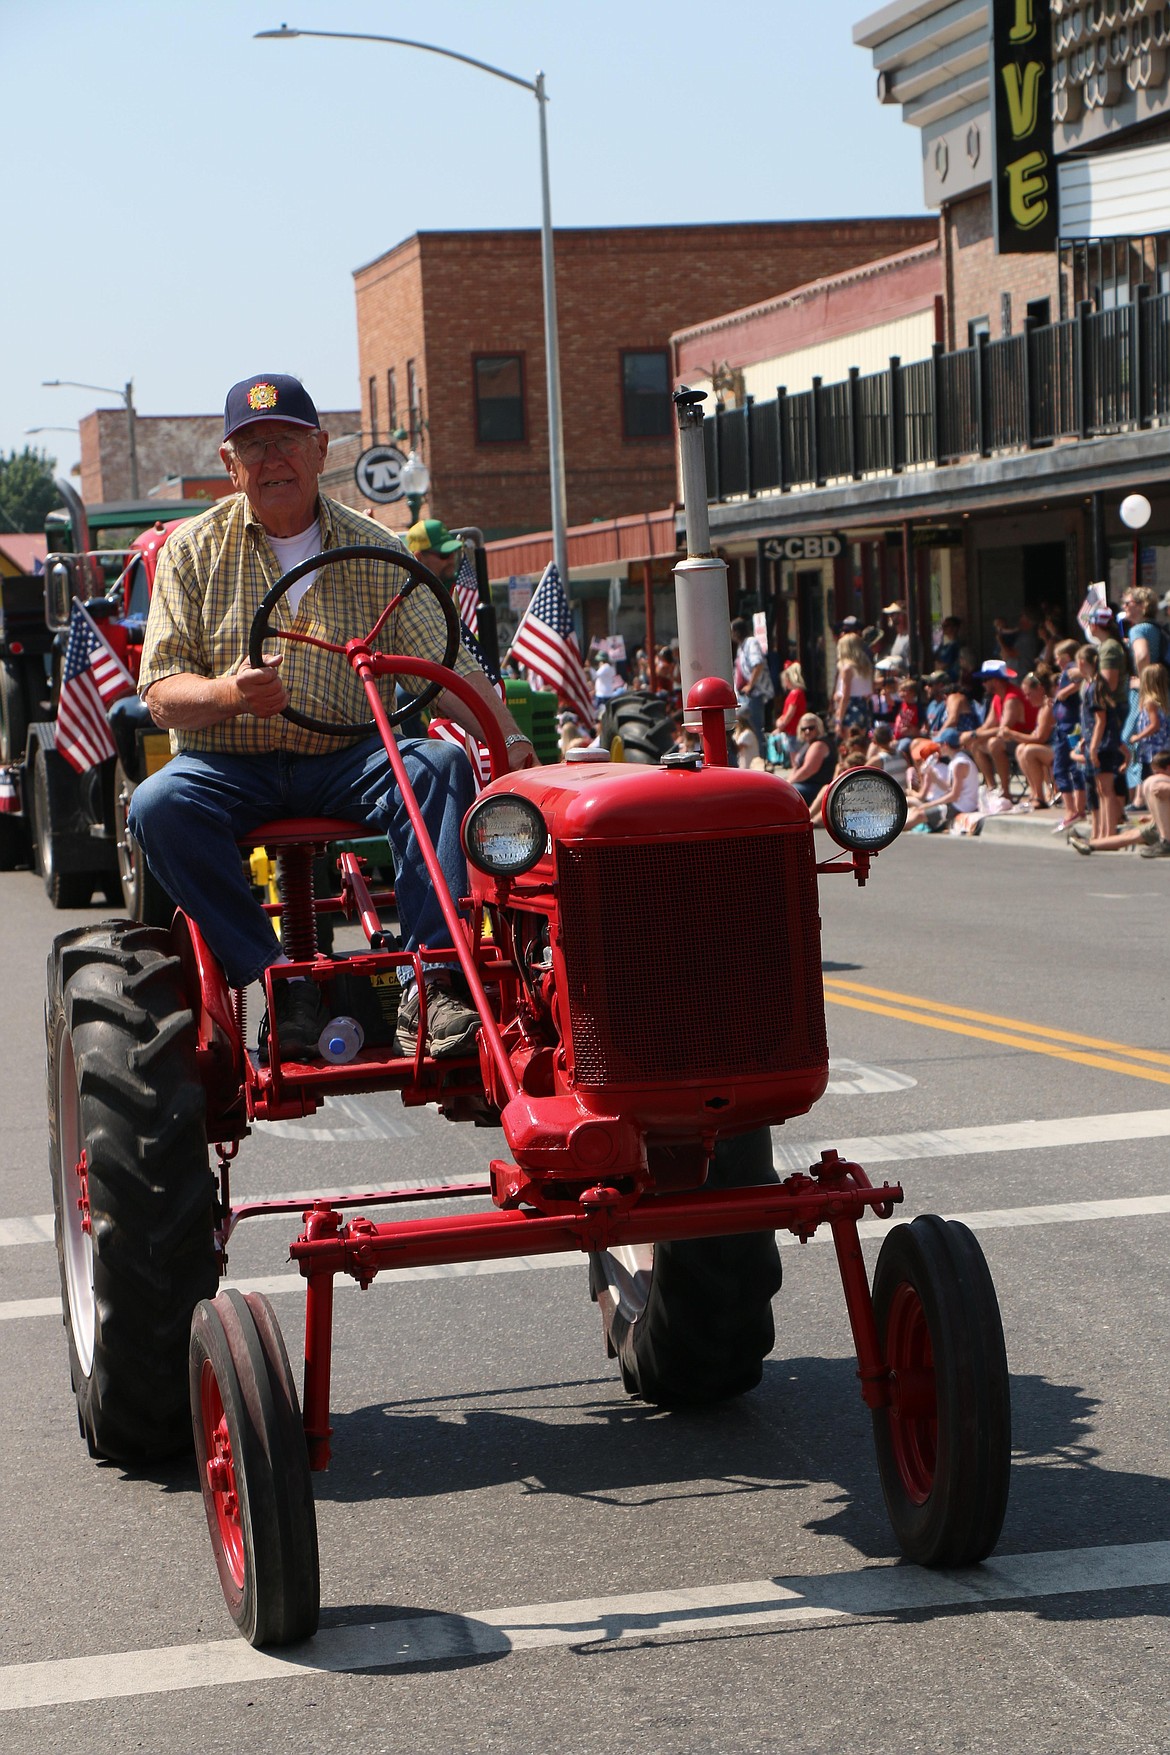 The Sandpoint Lions' Grand Parade attracted a large number of participants and parade-goers.